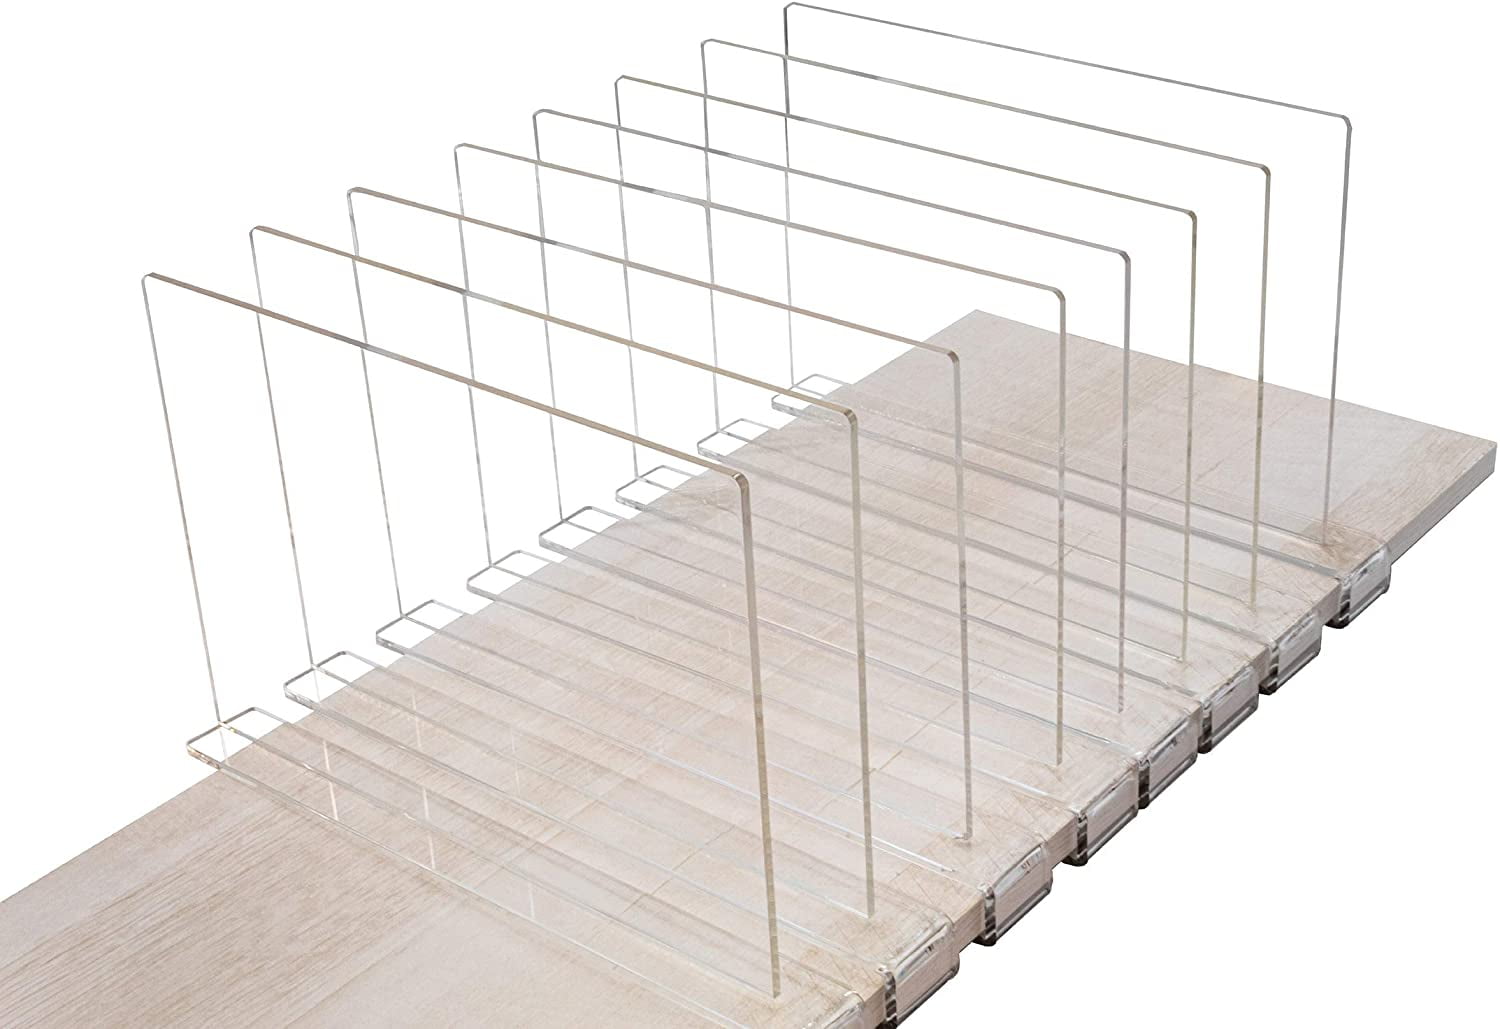 ROUFA 4Pcs Clear Acrylic Shelf Dividers, Adjustable Closet Organizer Fit  for Any Thickness of Shelves, Multi-Purpose Wood Shelf Separators for